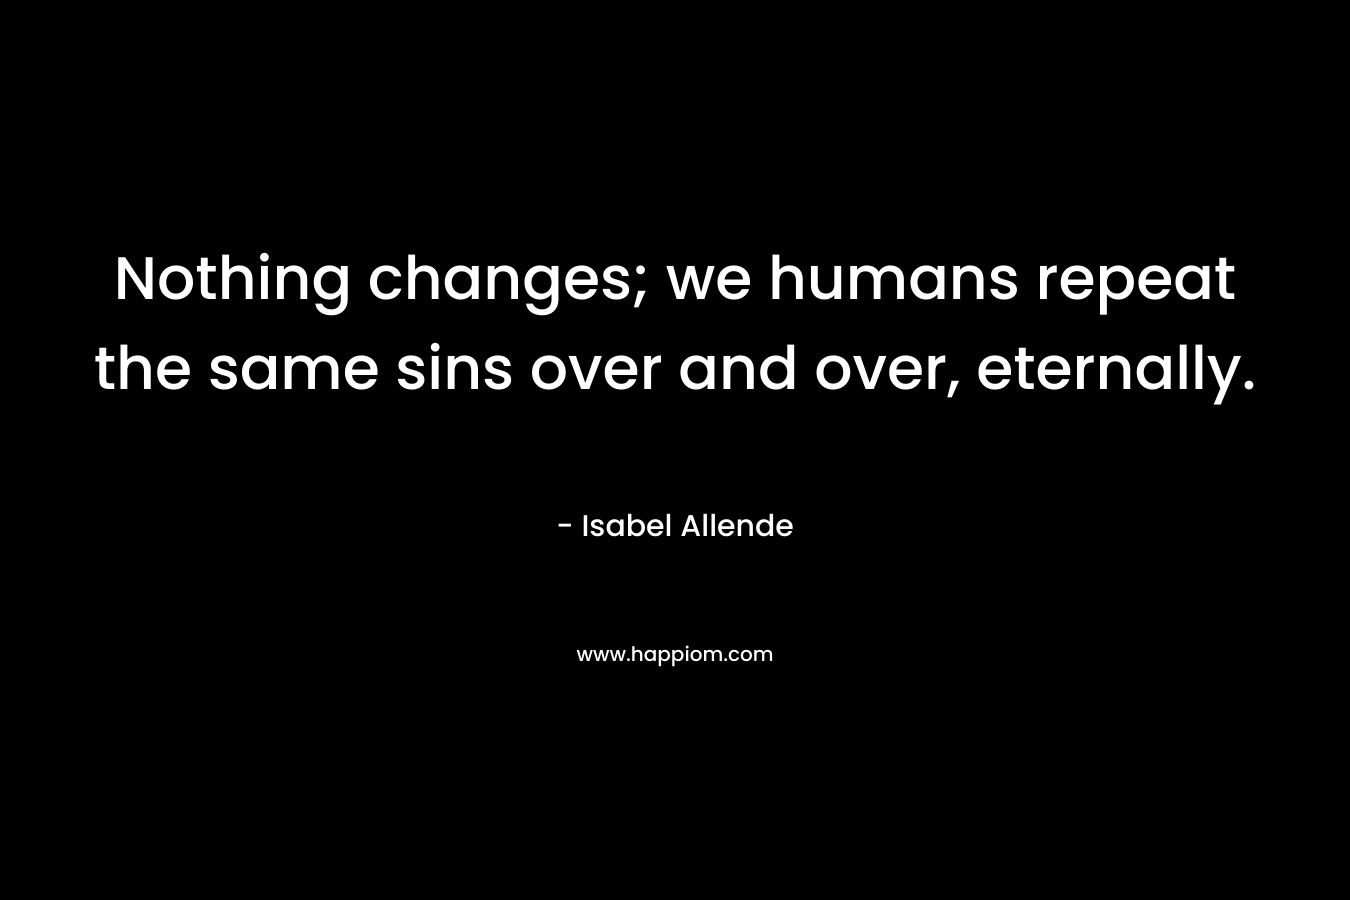 Nothing changes; we humans repeat the same sins over and over, eternally. – Isabel Allende